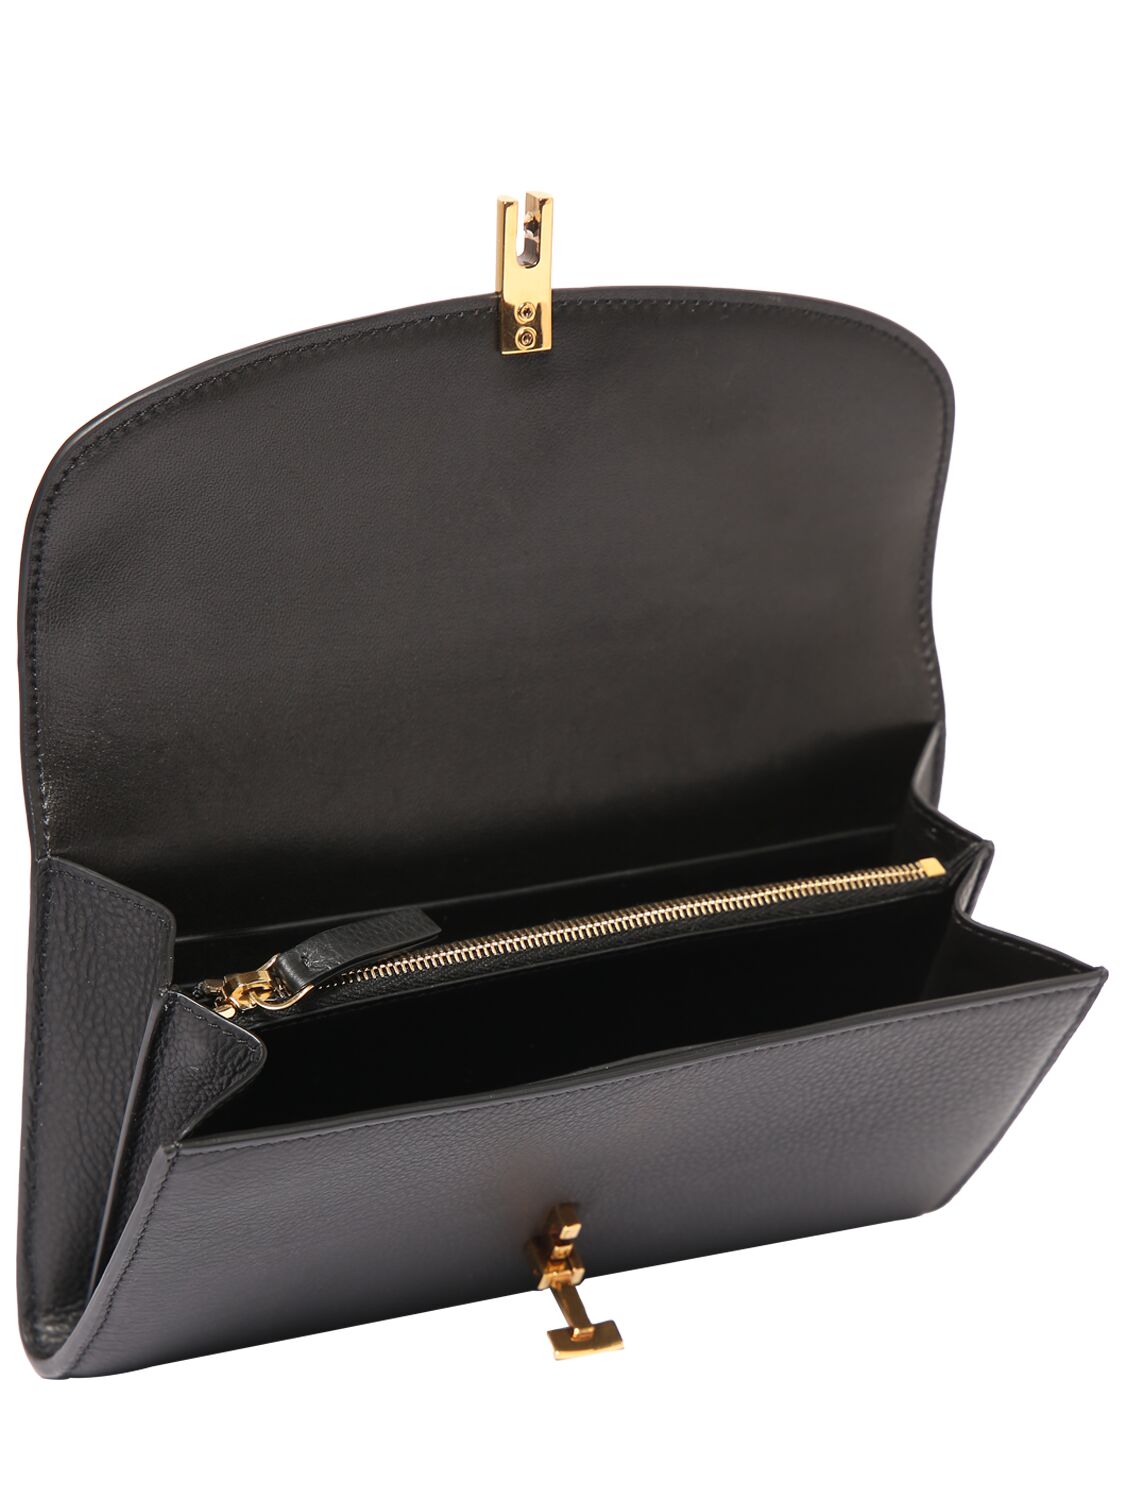 Shop The Row Sofia Continental Leather Wallet In Black Ang